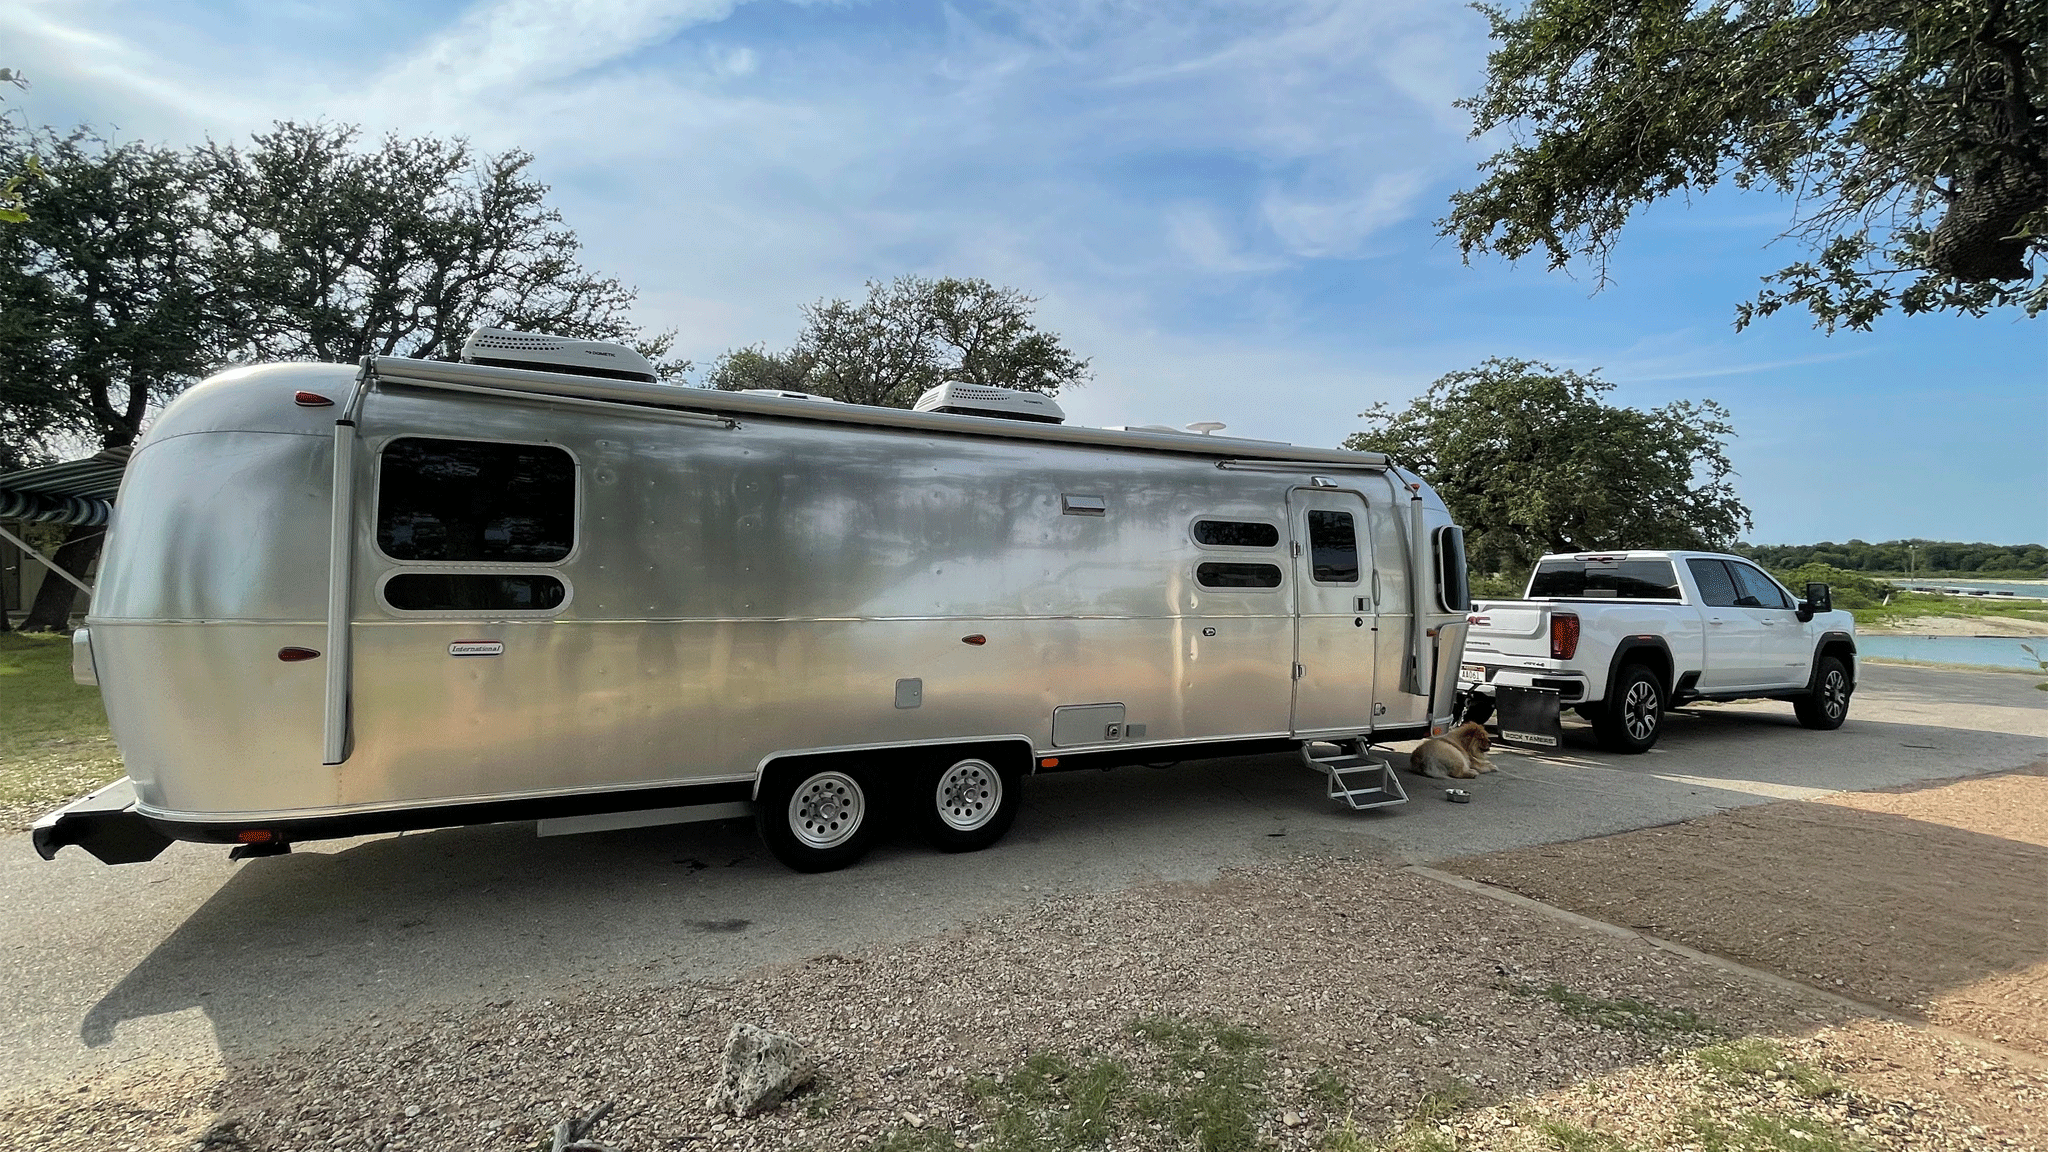 An Airstream International Travel Trailer camper being towed by a white truck down the road.